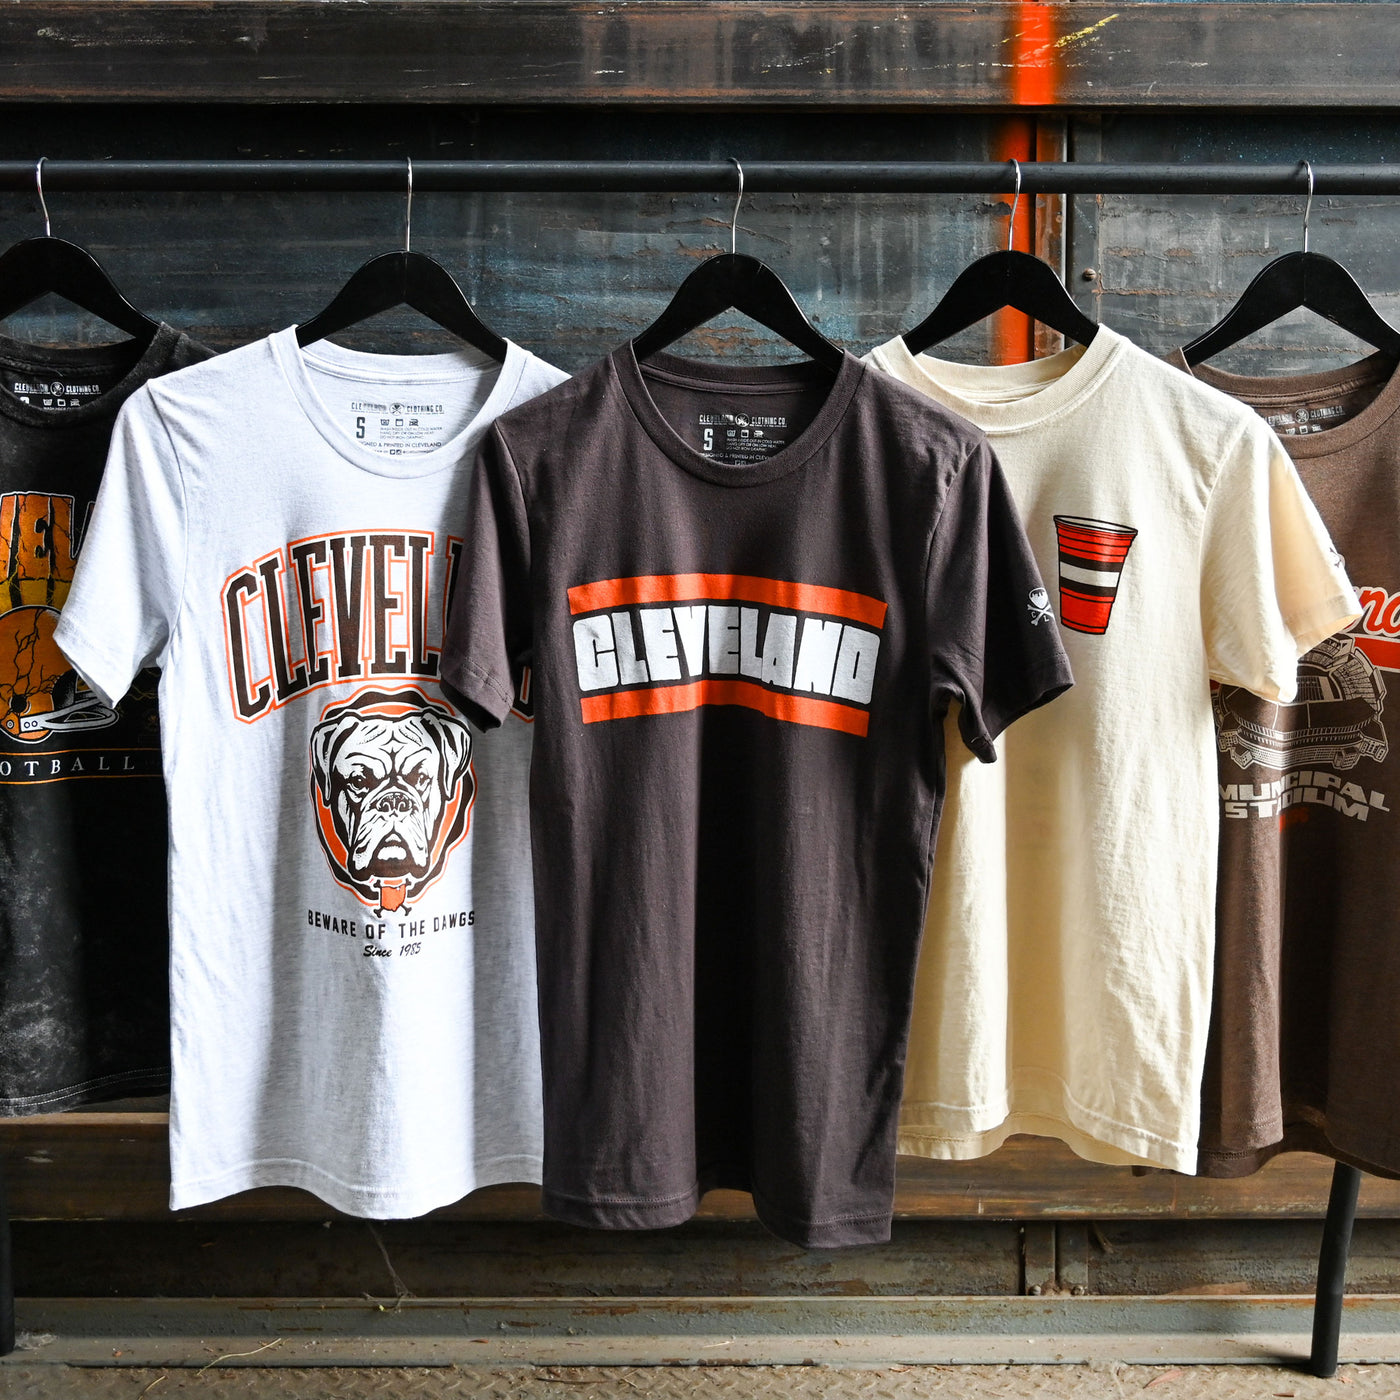 Official cleveland browns helmet T-shirts, hoodie, tank top